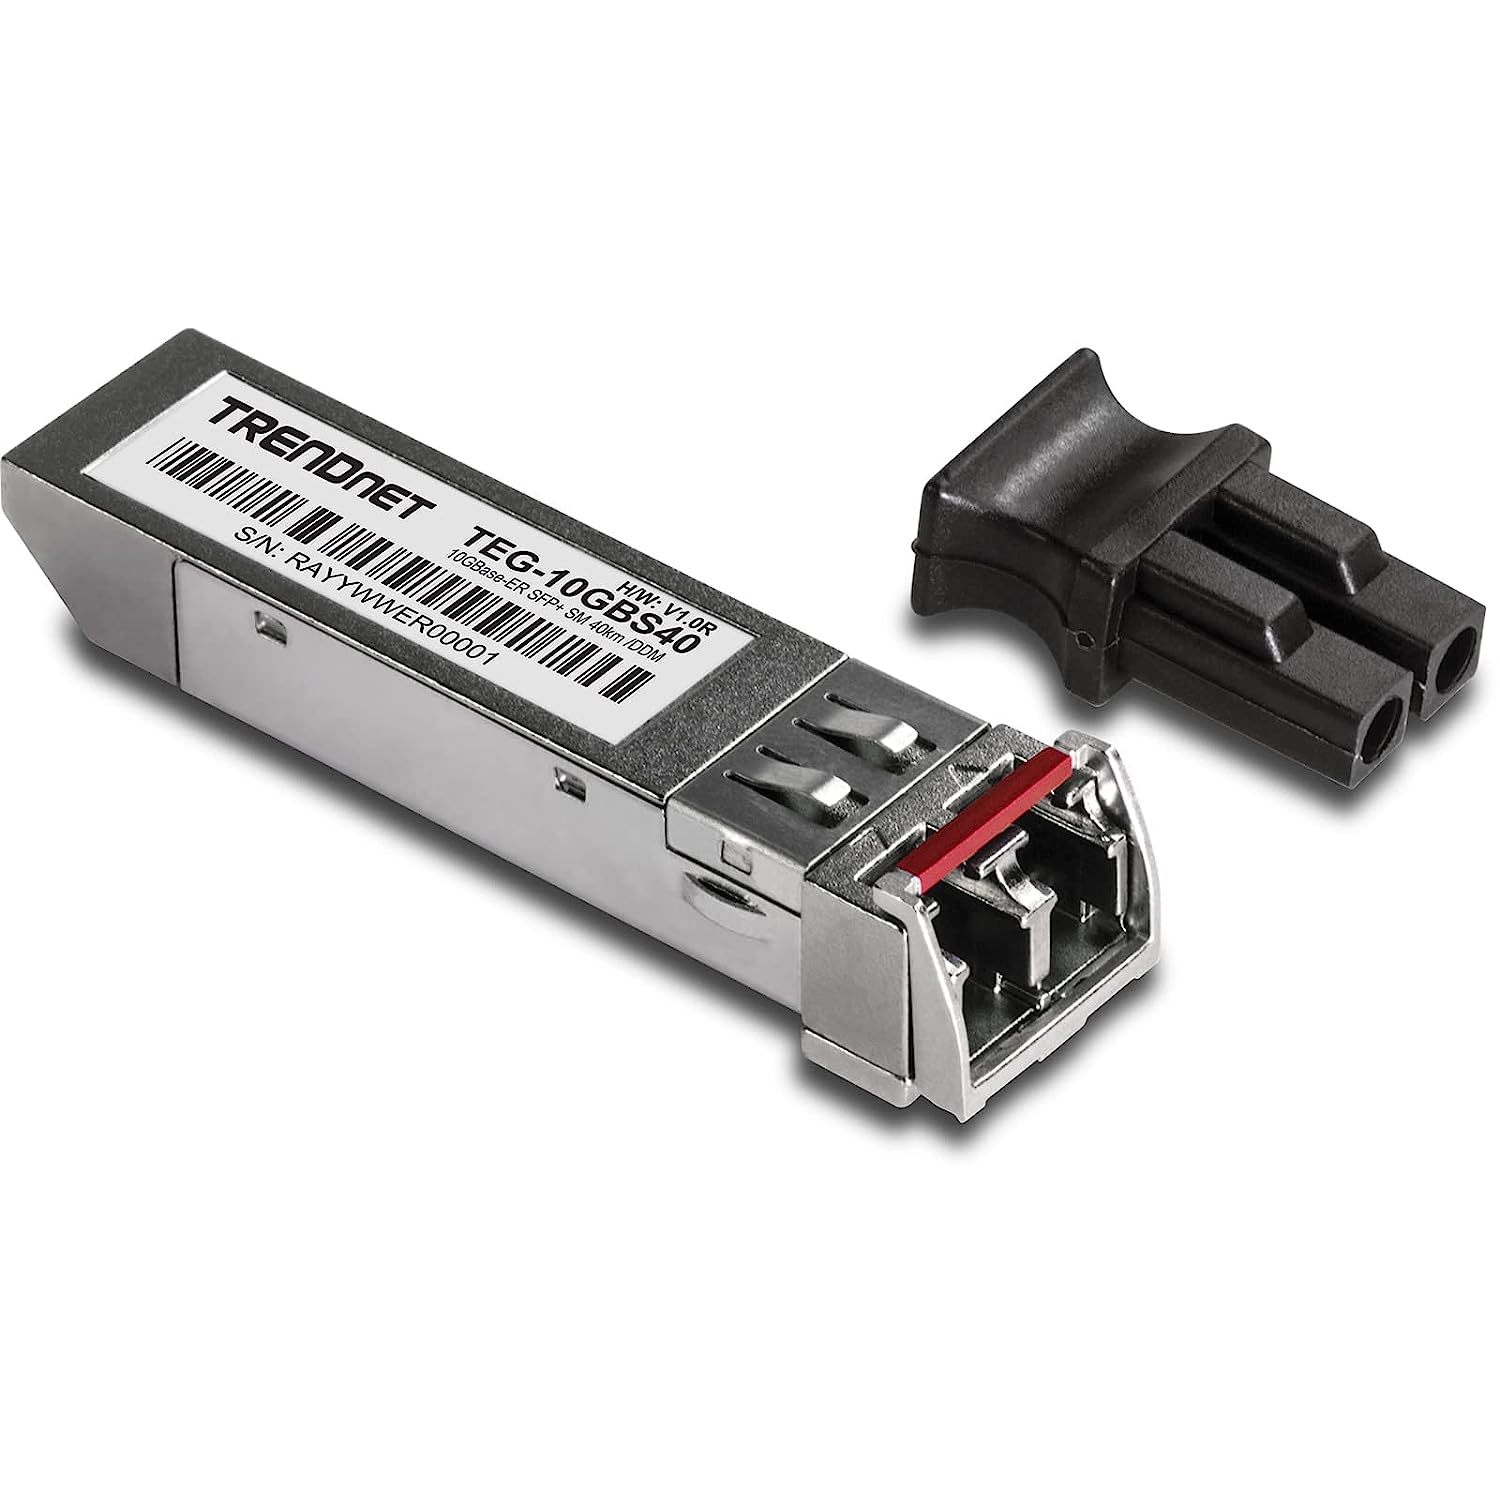 Primary image for TRENDnet SFP to RJ45 10GBASE-ER SFP+ Single Mode LC Module, TEG-10GBS40, Up to 4